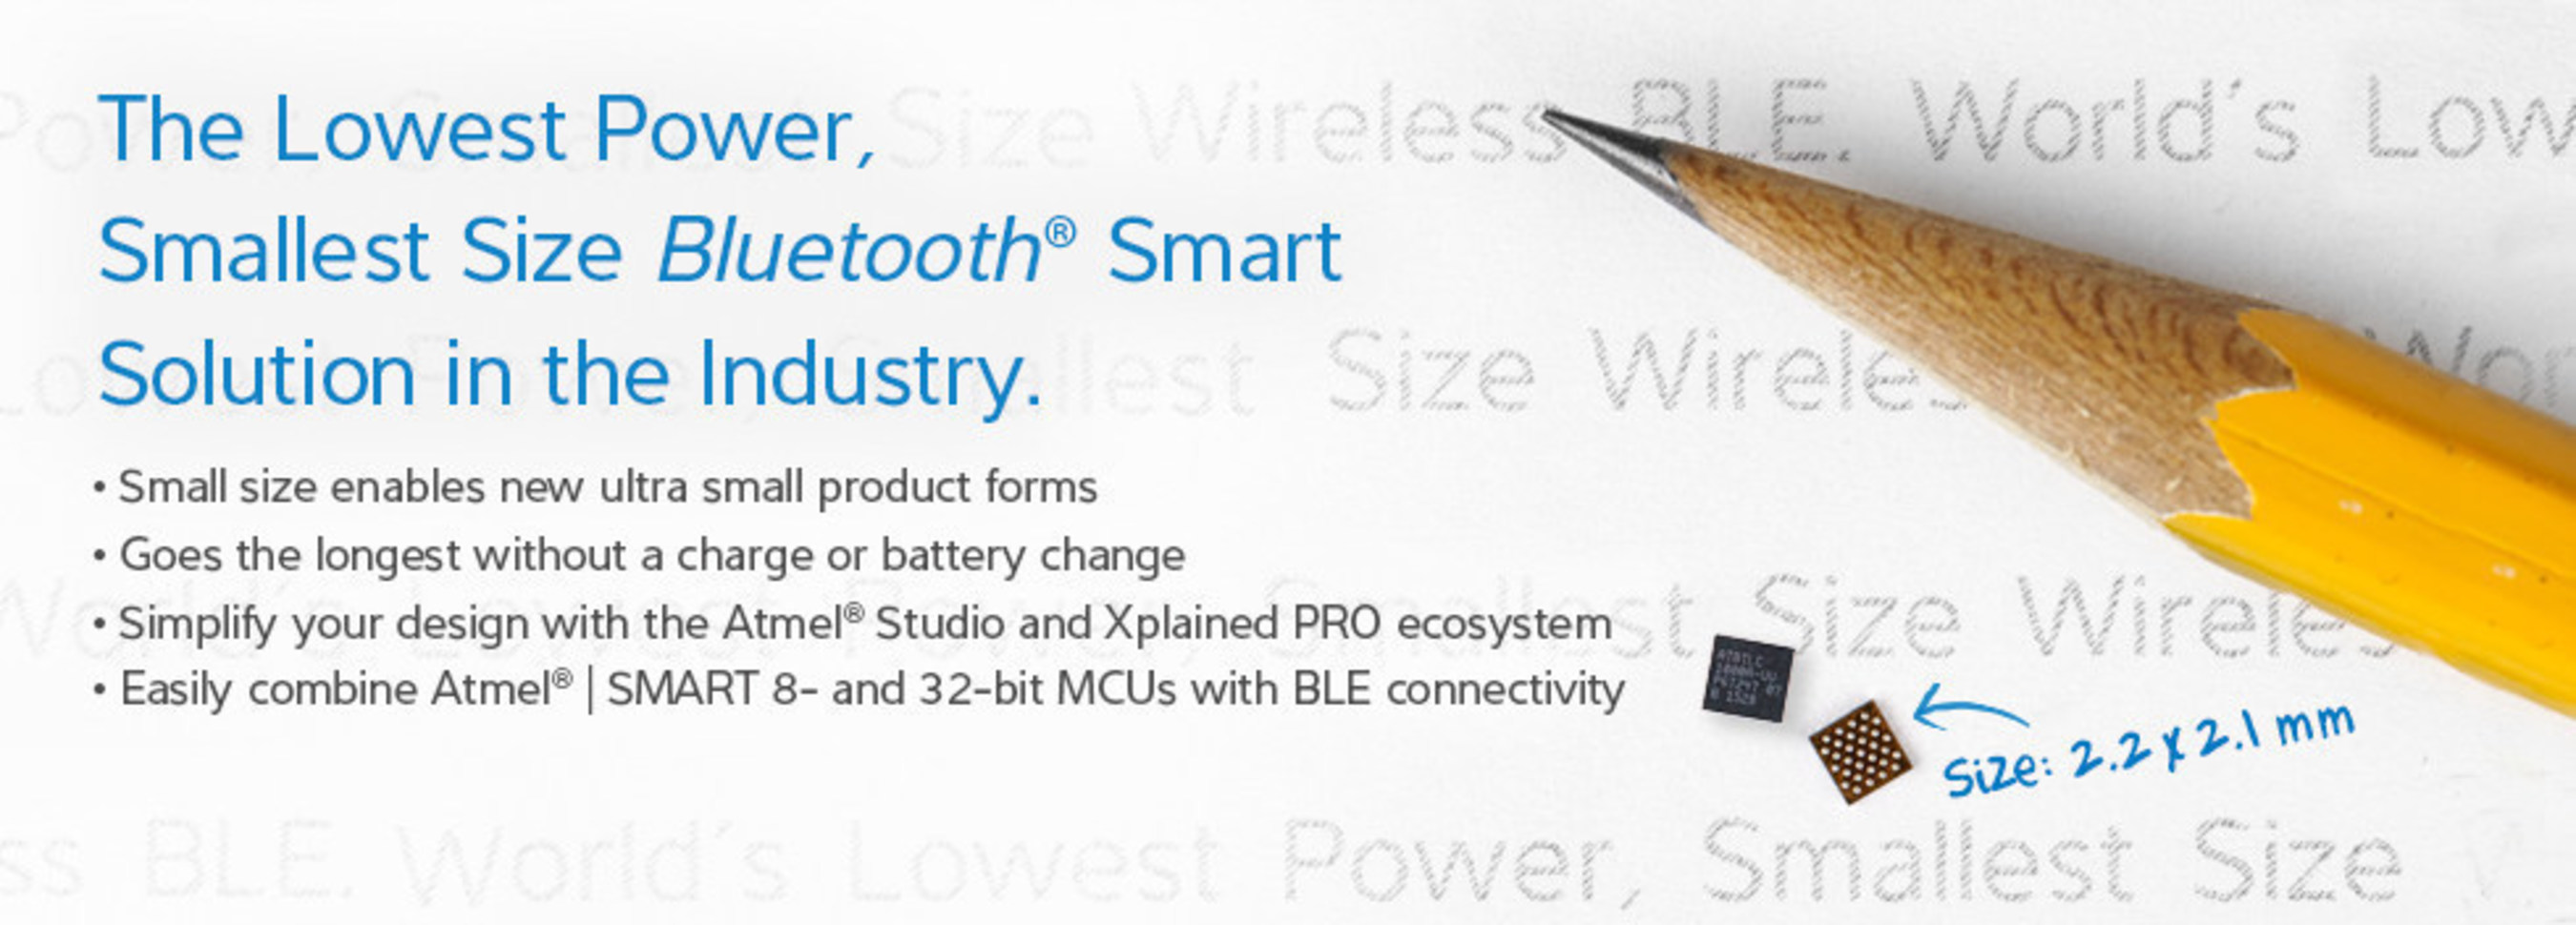 Atmel SmartConnect Bluetooth Smart BTLC1000  increase battery life by as much as one year or more for certain applications.